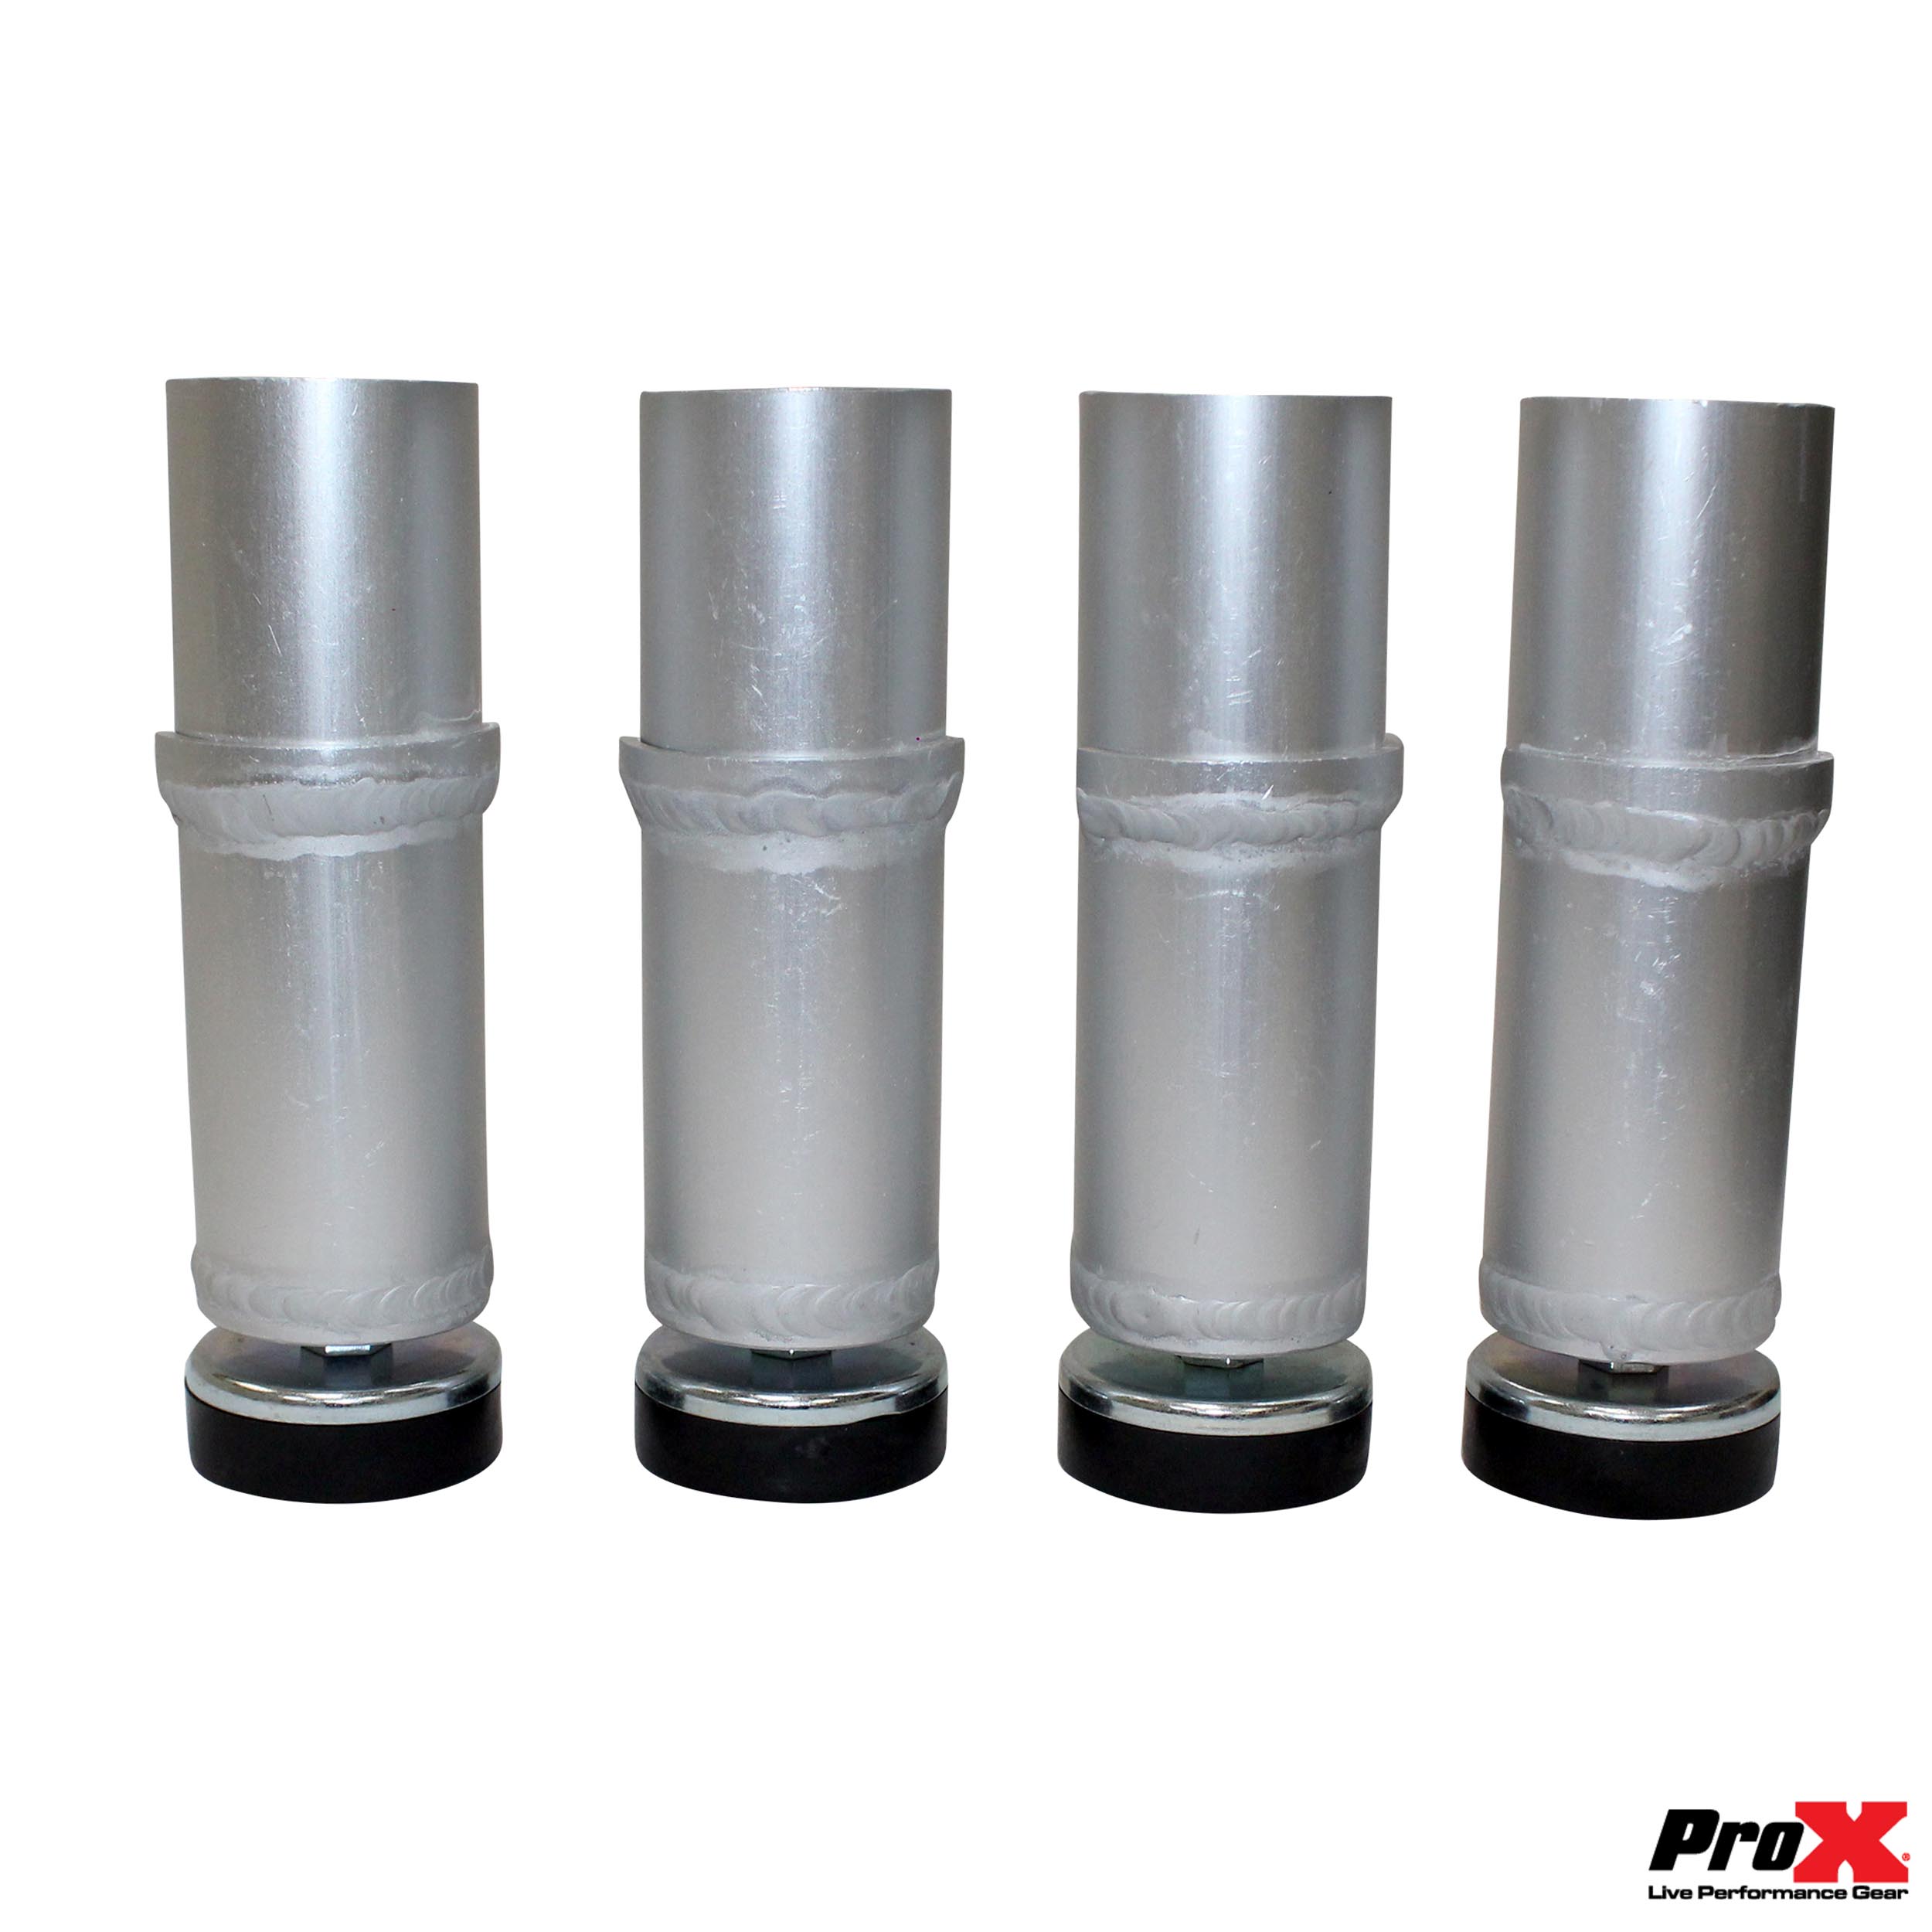 prox-xsq-8-pack-of-8in-stage-legs-4-.jpeg